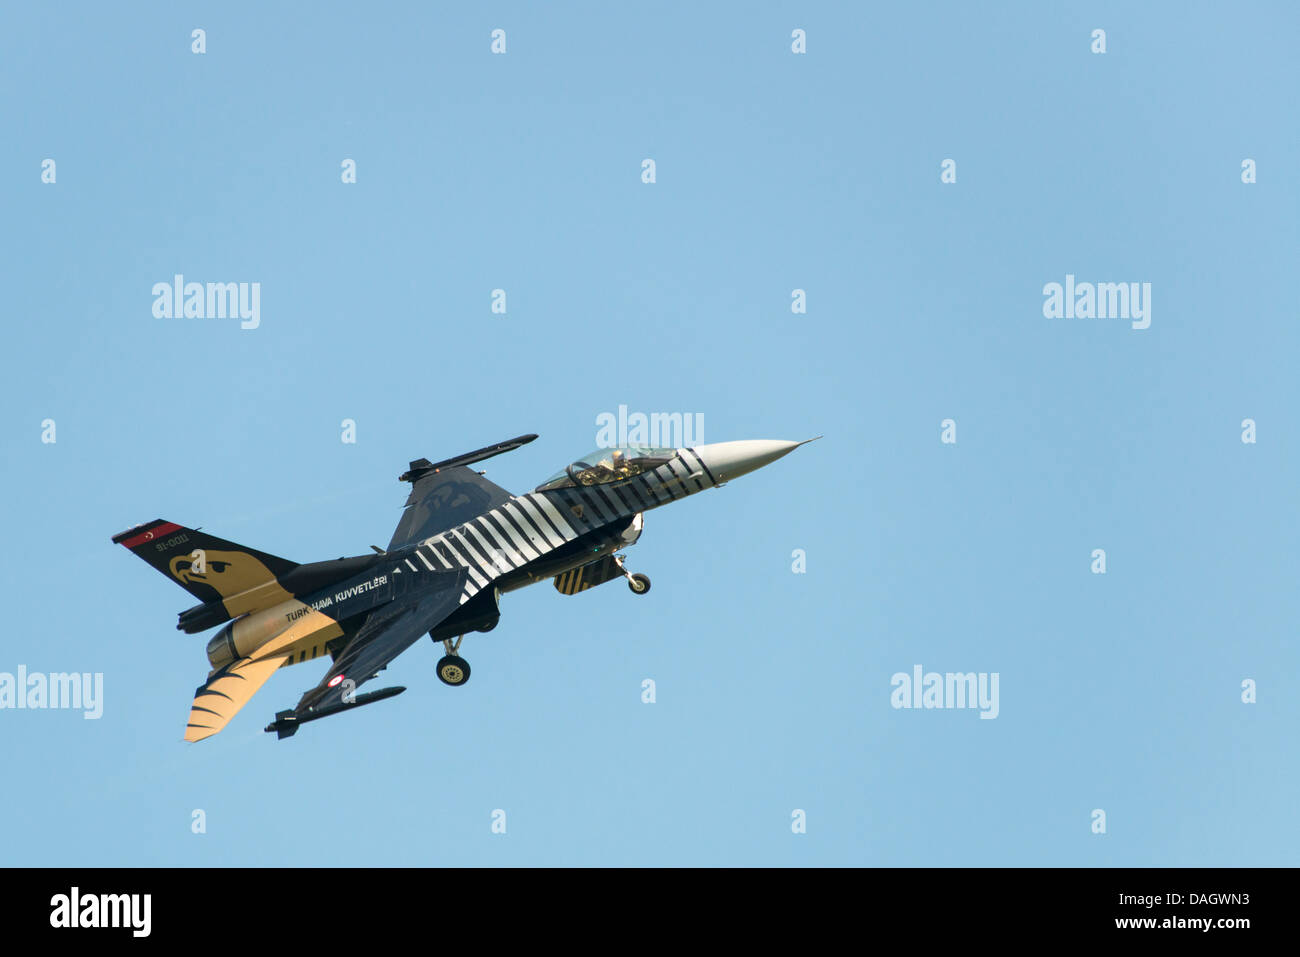 Turkish Air Force Solo Demonstration F-16 Fighter jet displays at the 2013 RAF Waddington Air Show. Stock Photo